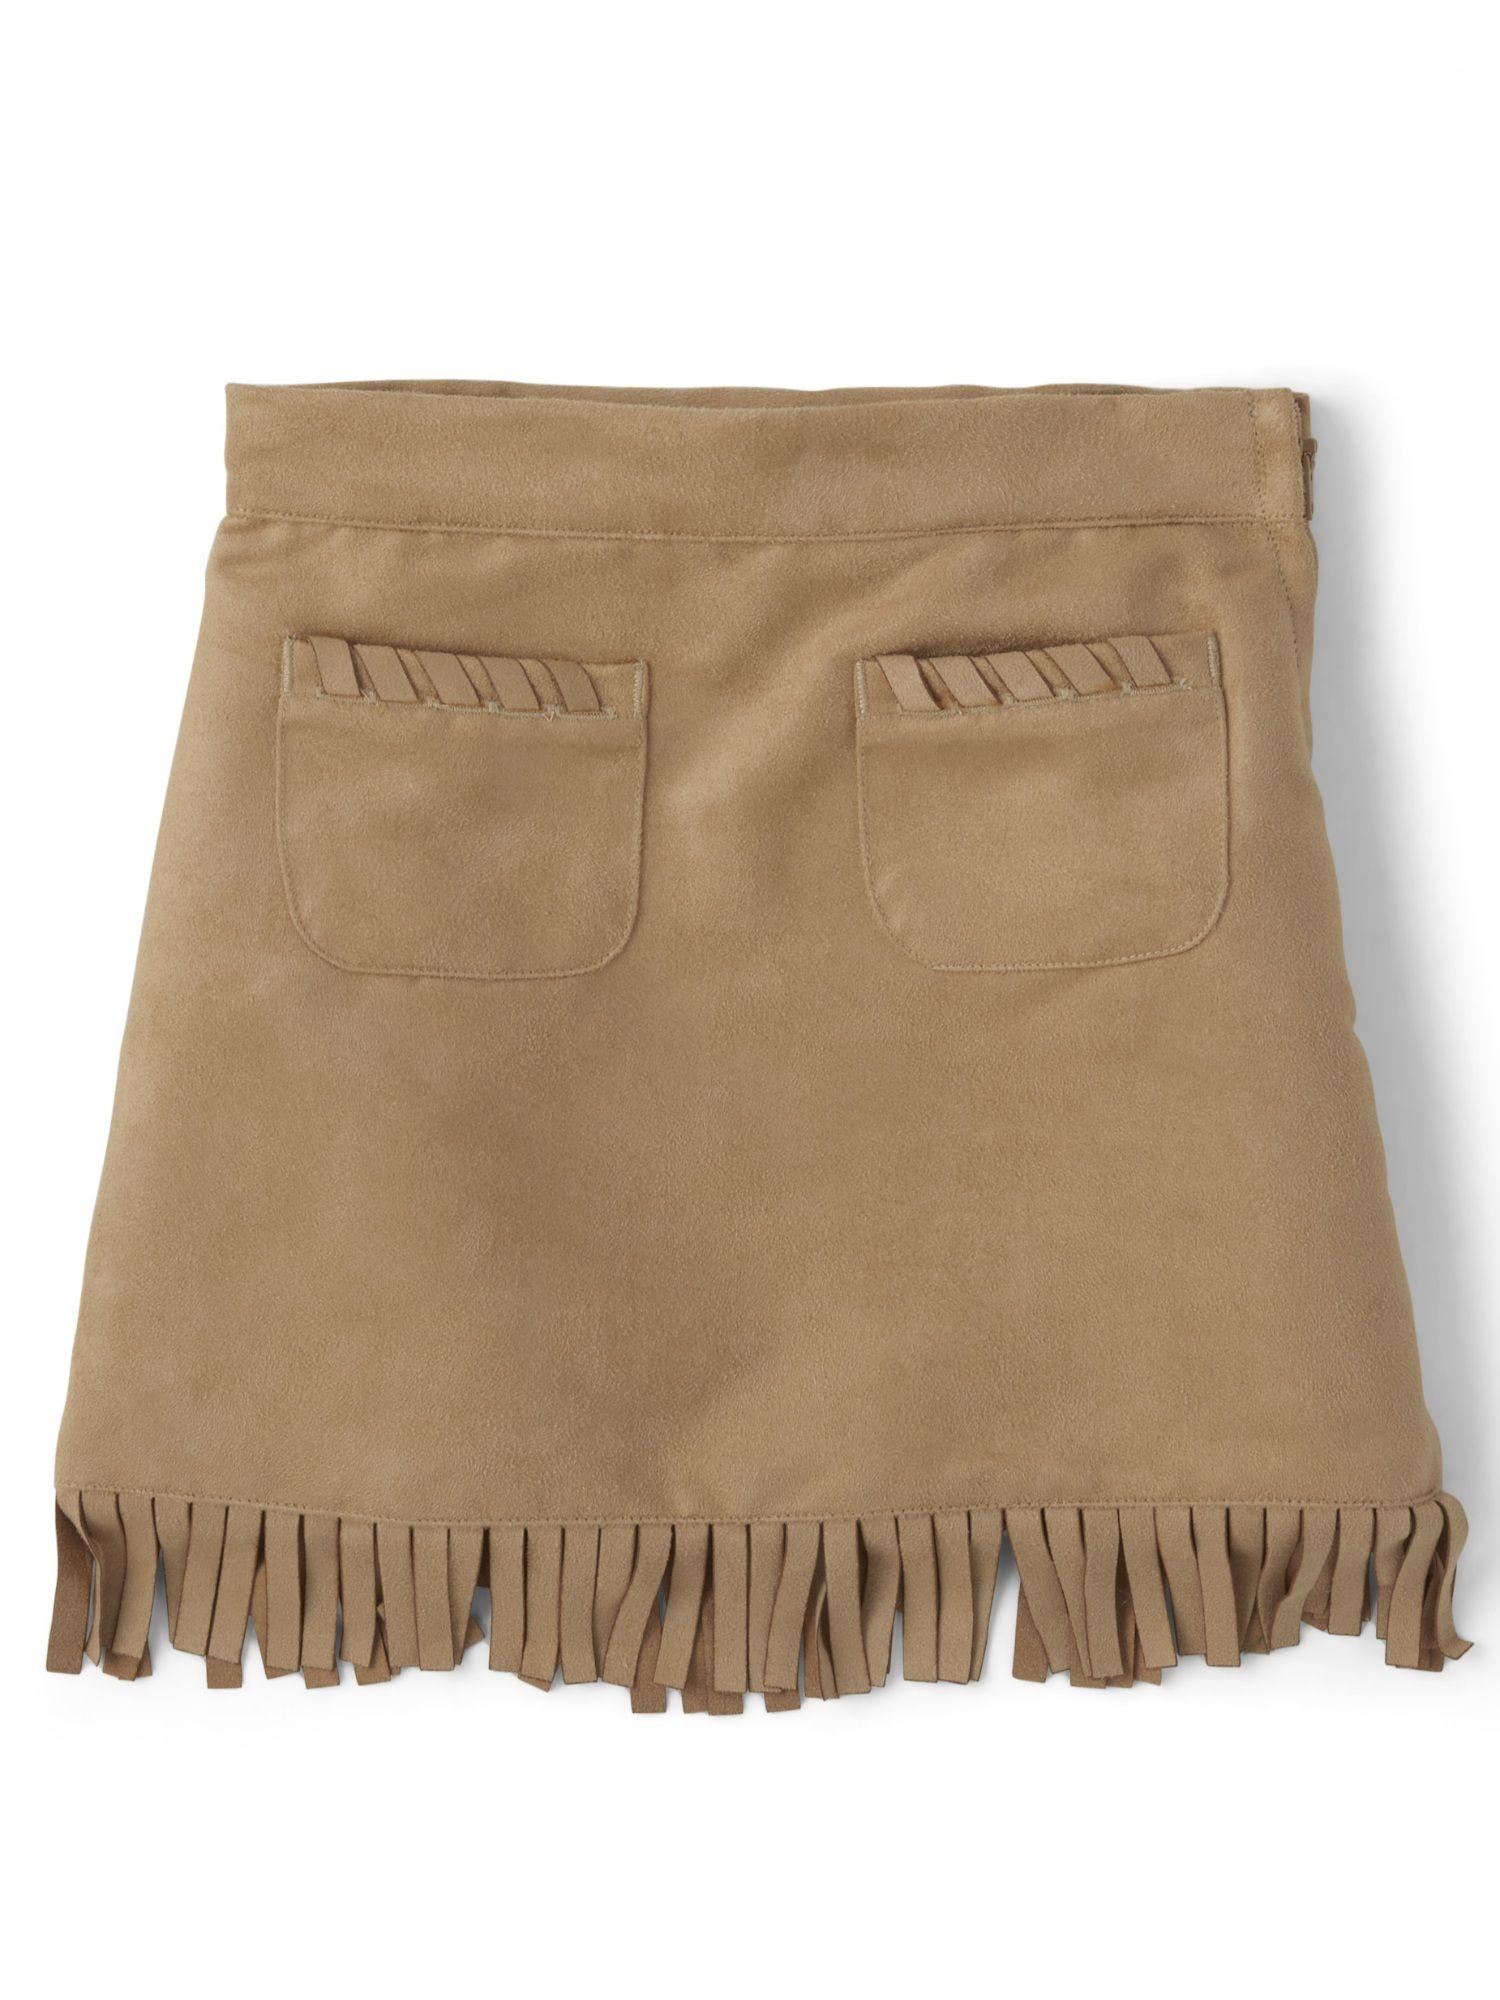 girls mid-waist skirt with fringes (12-18 months)